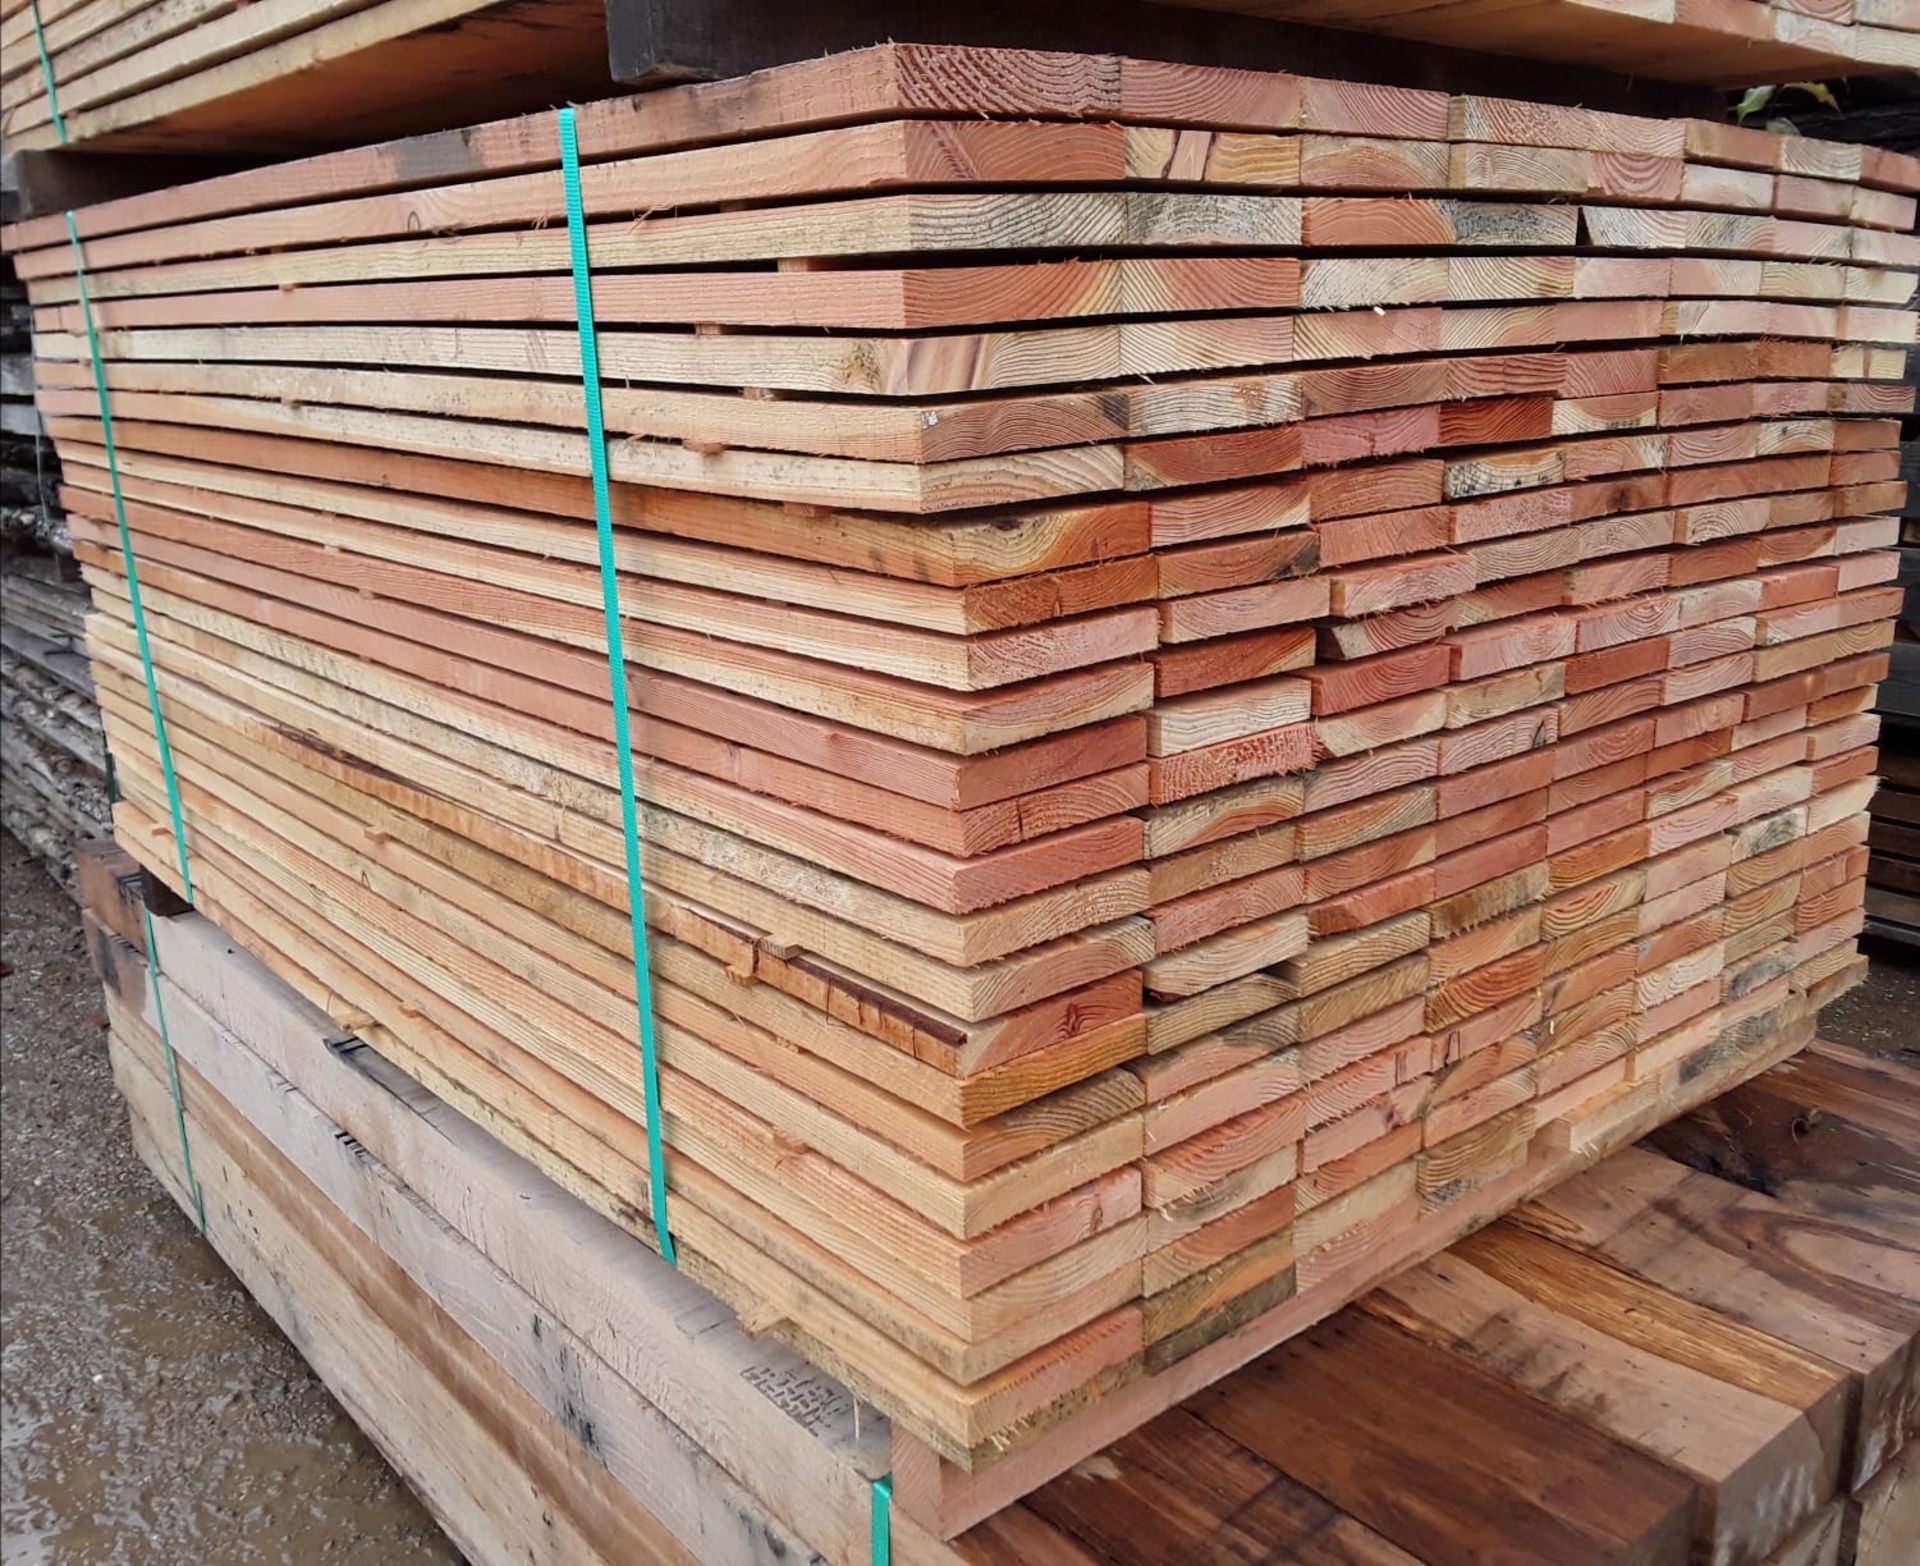 100x Softwood Unseasoned Sawn Mixed Larch / Douglas Fir Boards / Planks / Cladding - Image 11 of 12